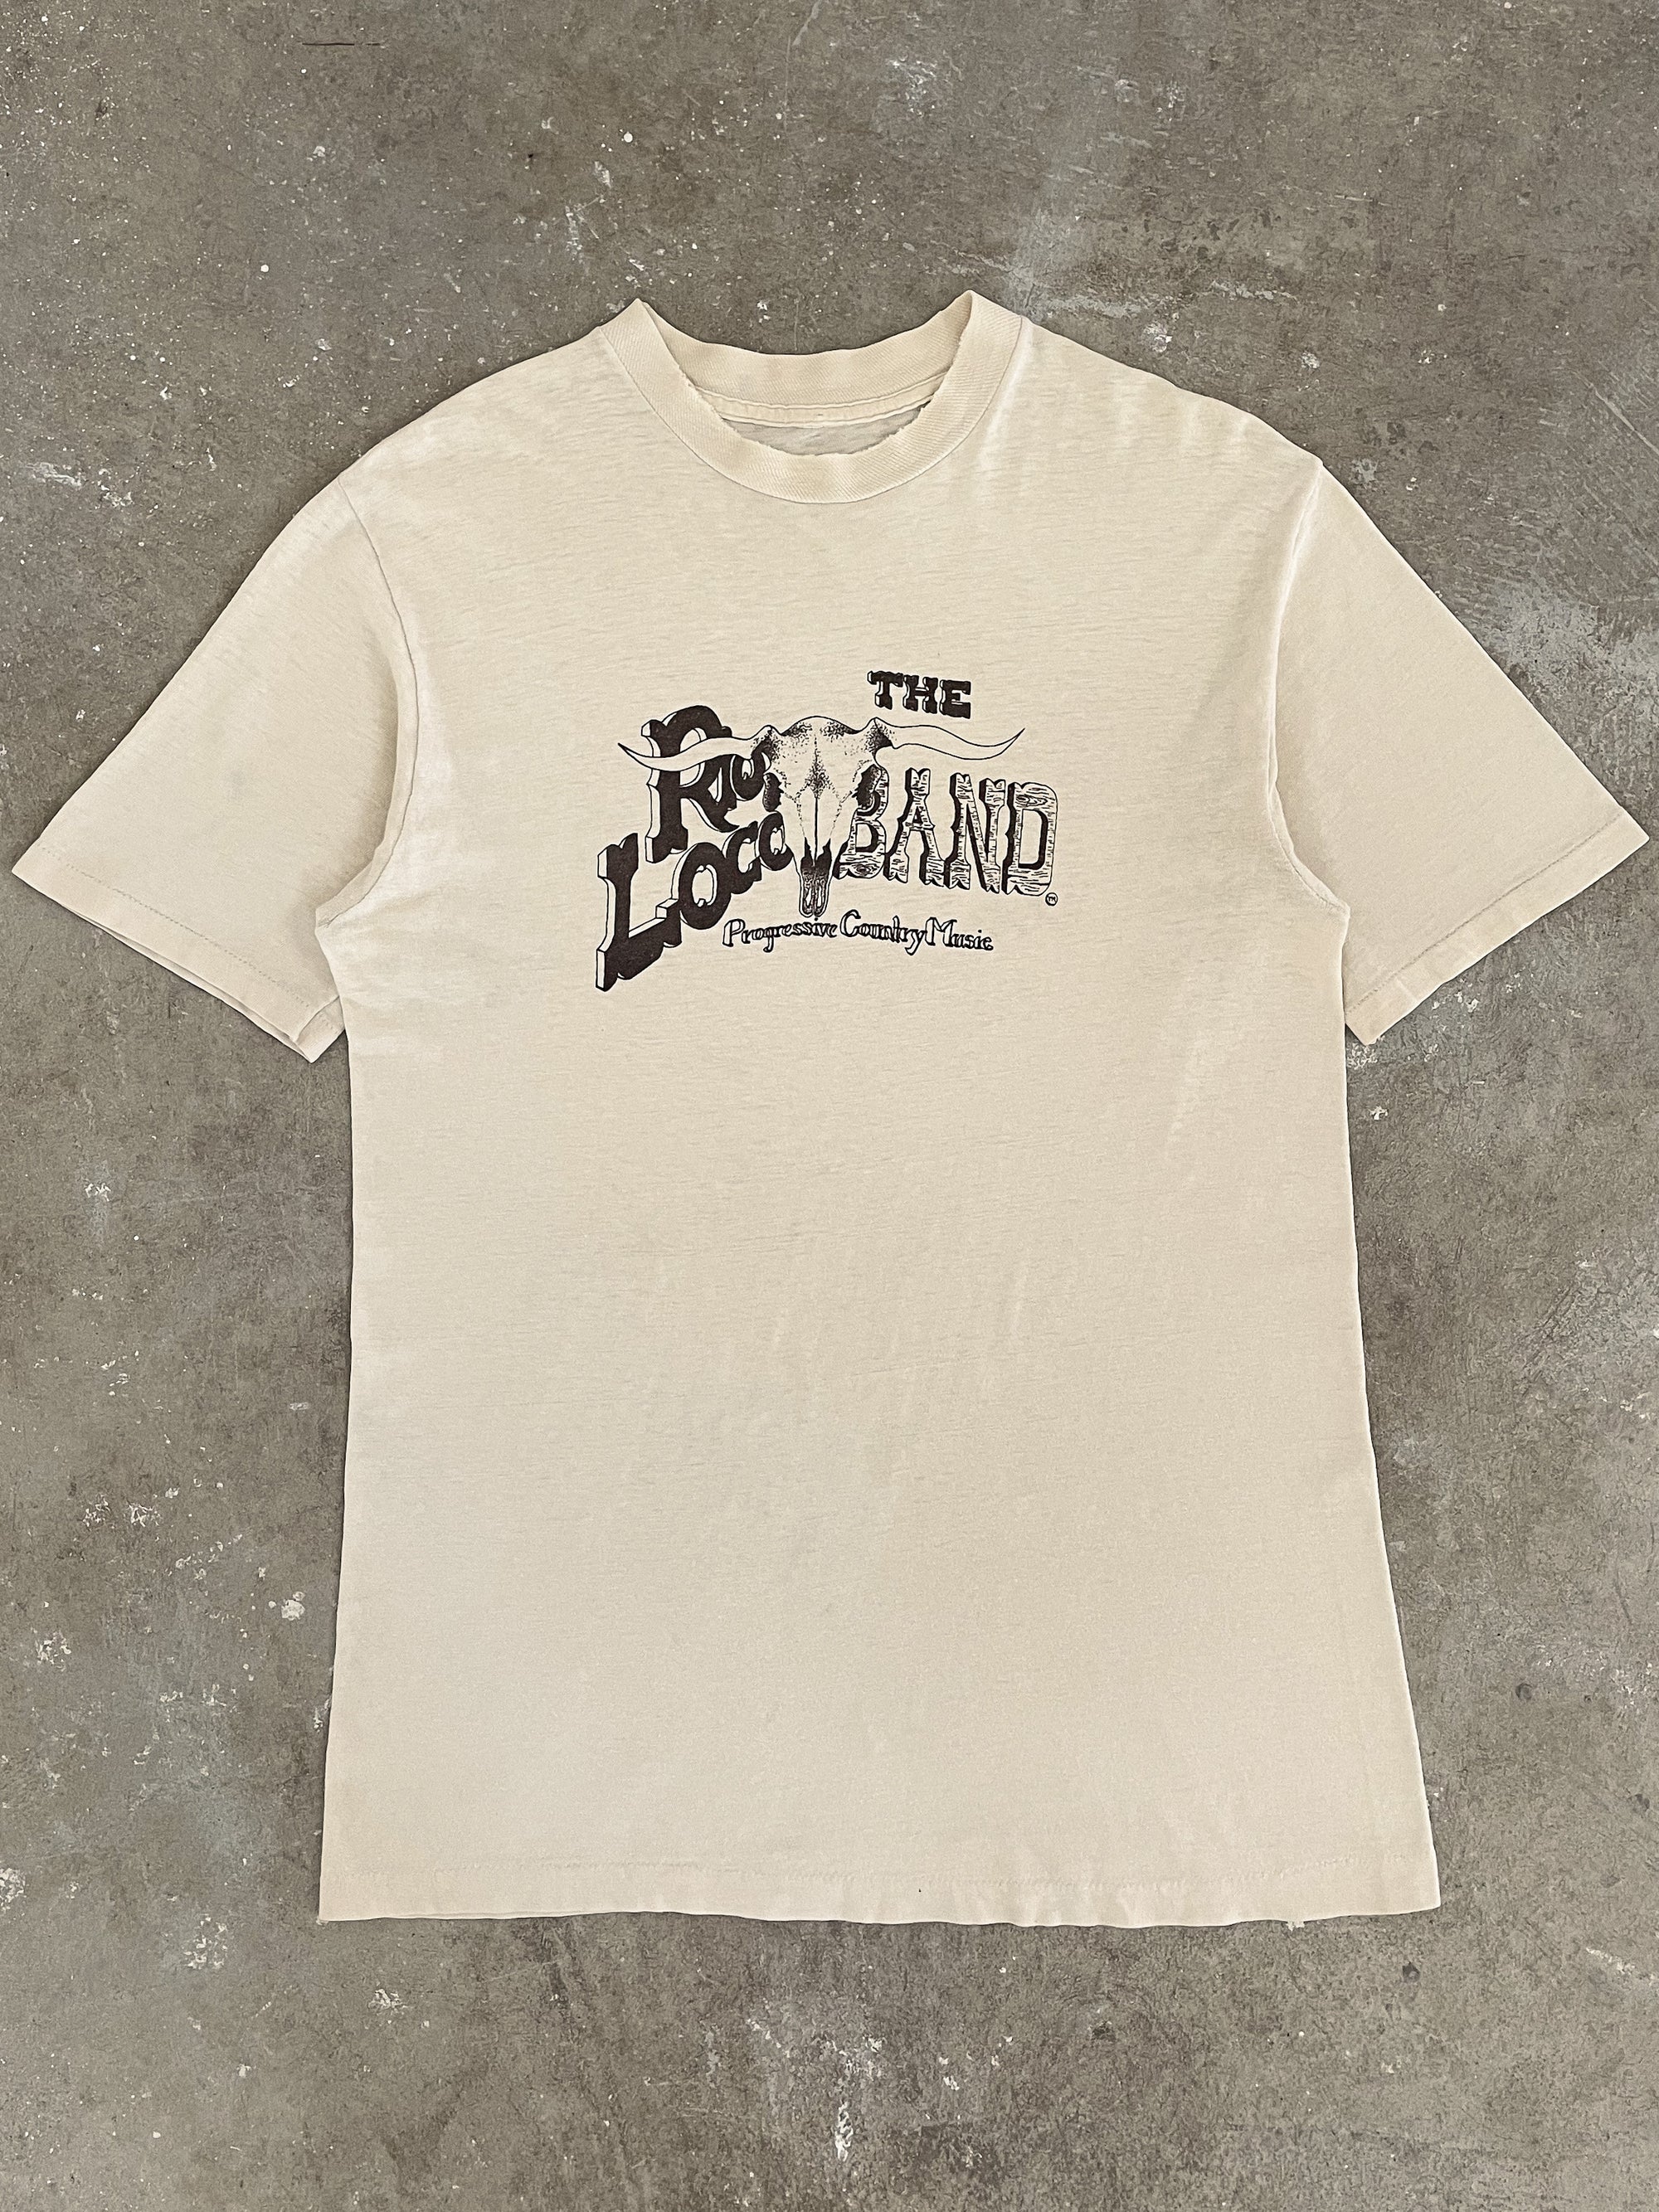 1980s “The Rio Loco Band” Distressed Tee (S/M)